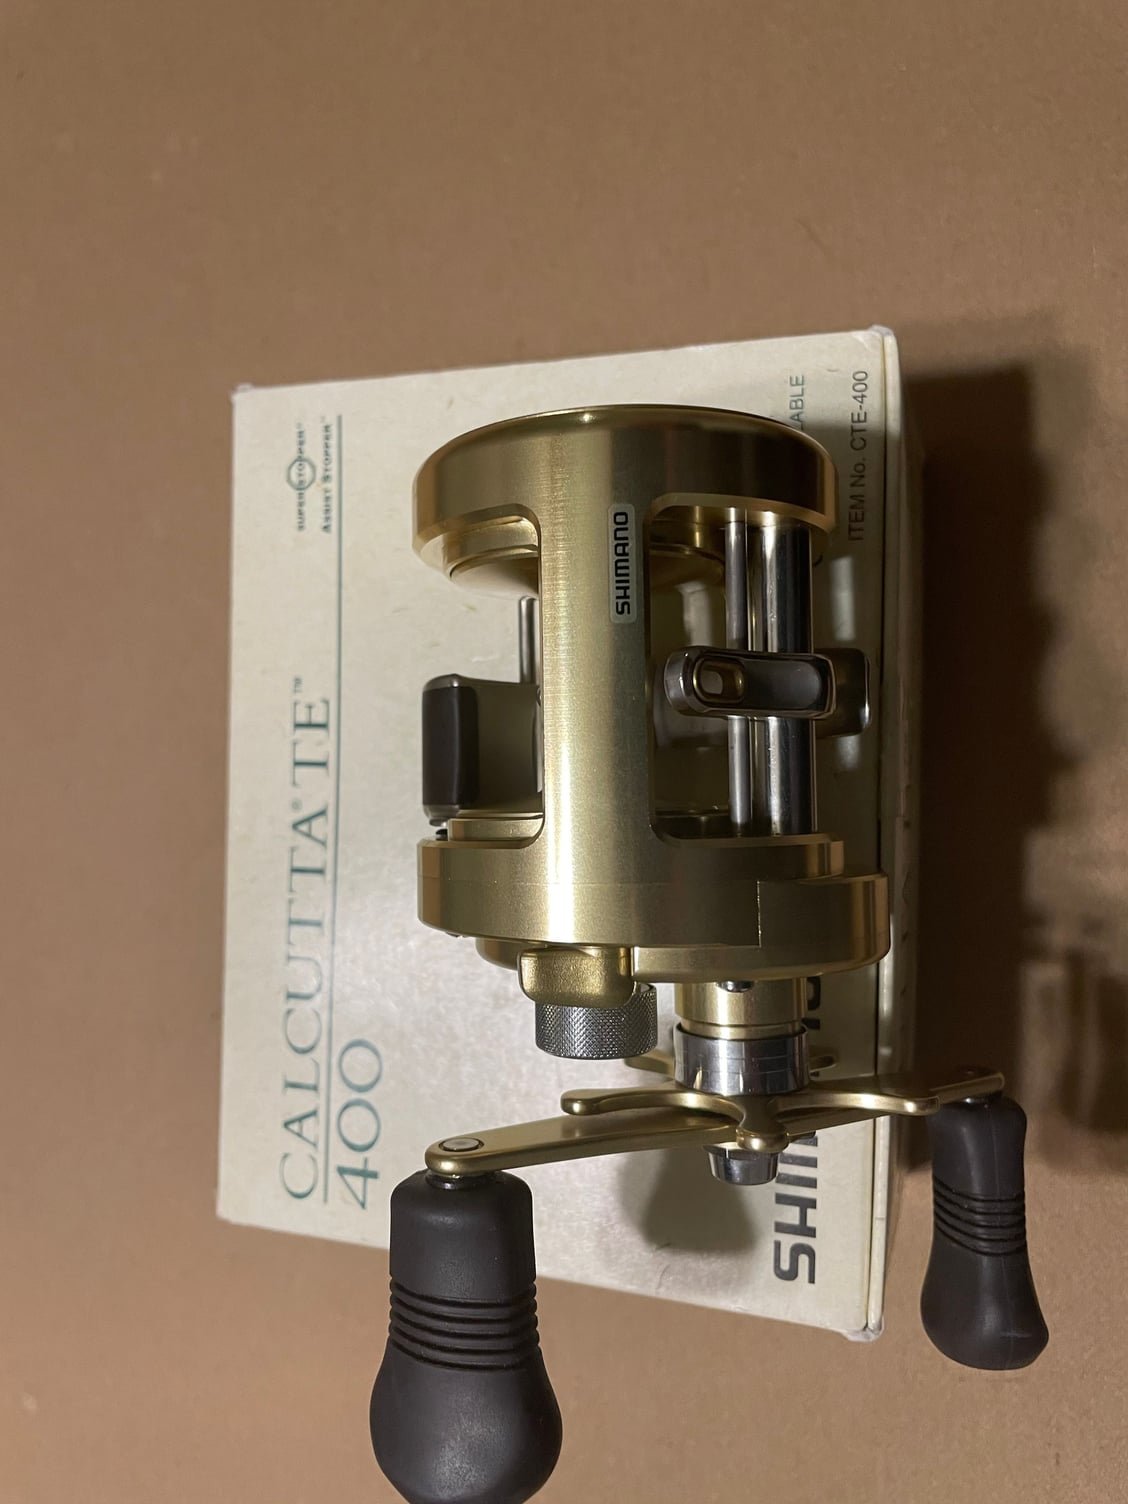 WTB - Shimano Calcutta 400 Levelwind Reels - The Hull Truth - Boating and  Fishing Forum